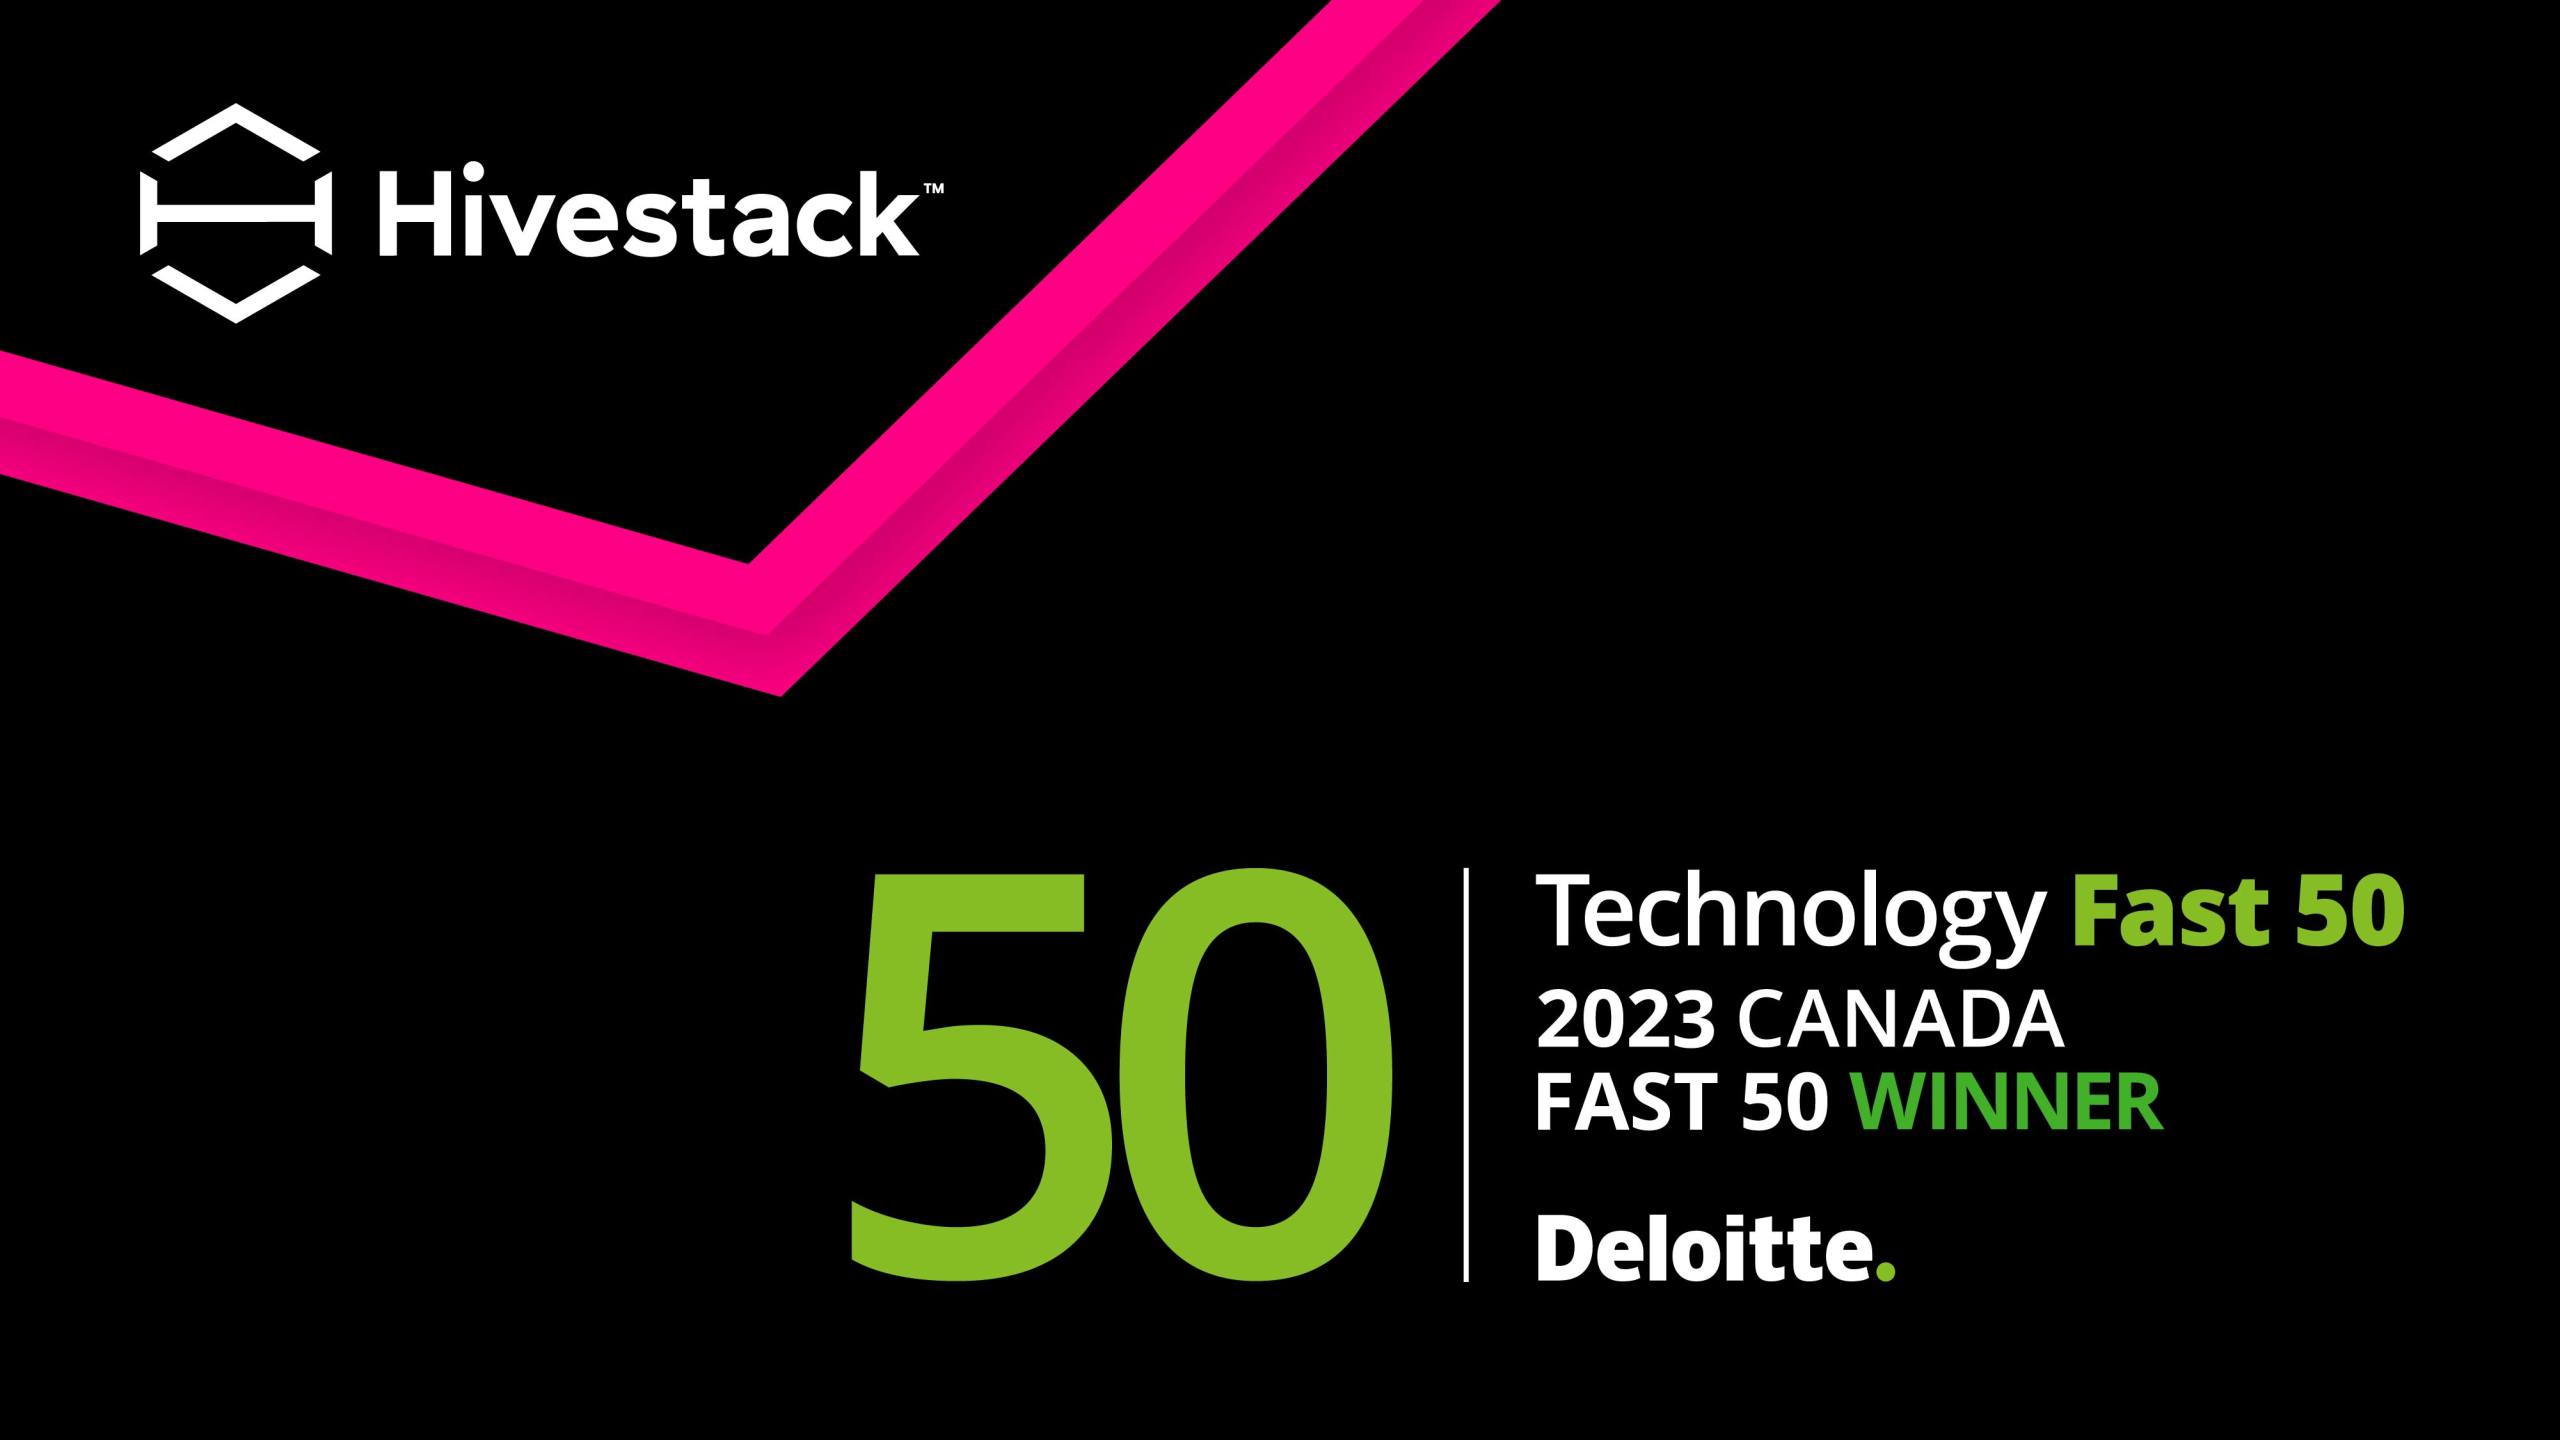 Hivestack received recognition as part of the 2023 Deloitte Technology Fast 50™ awards program for its rapid revenue growth, entrepreneurial spirit, and bold innovation.